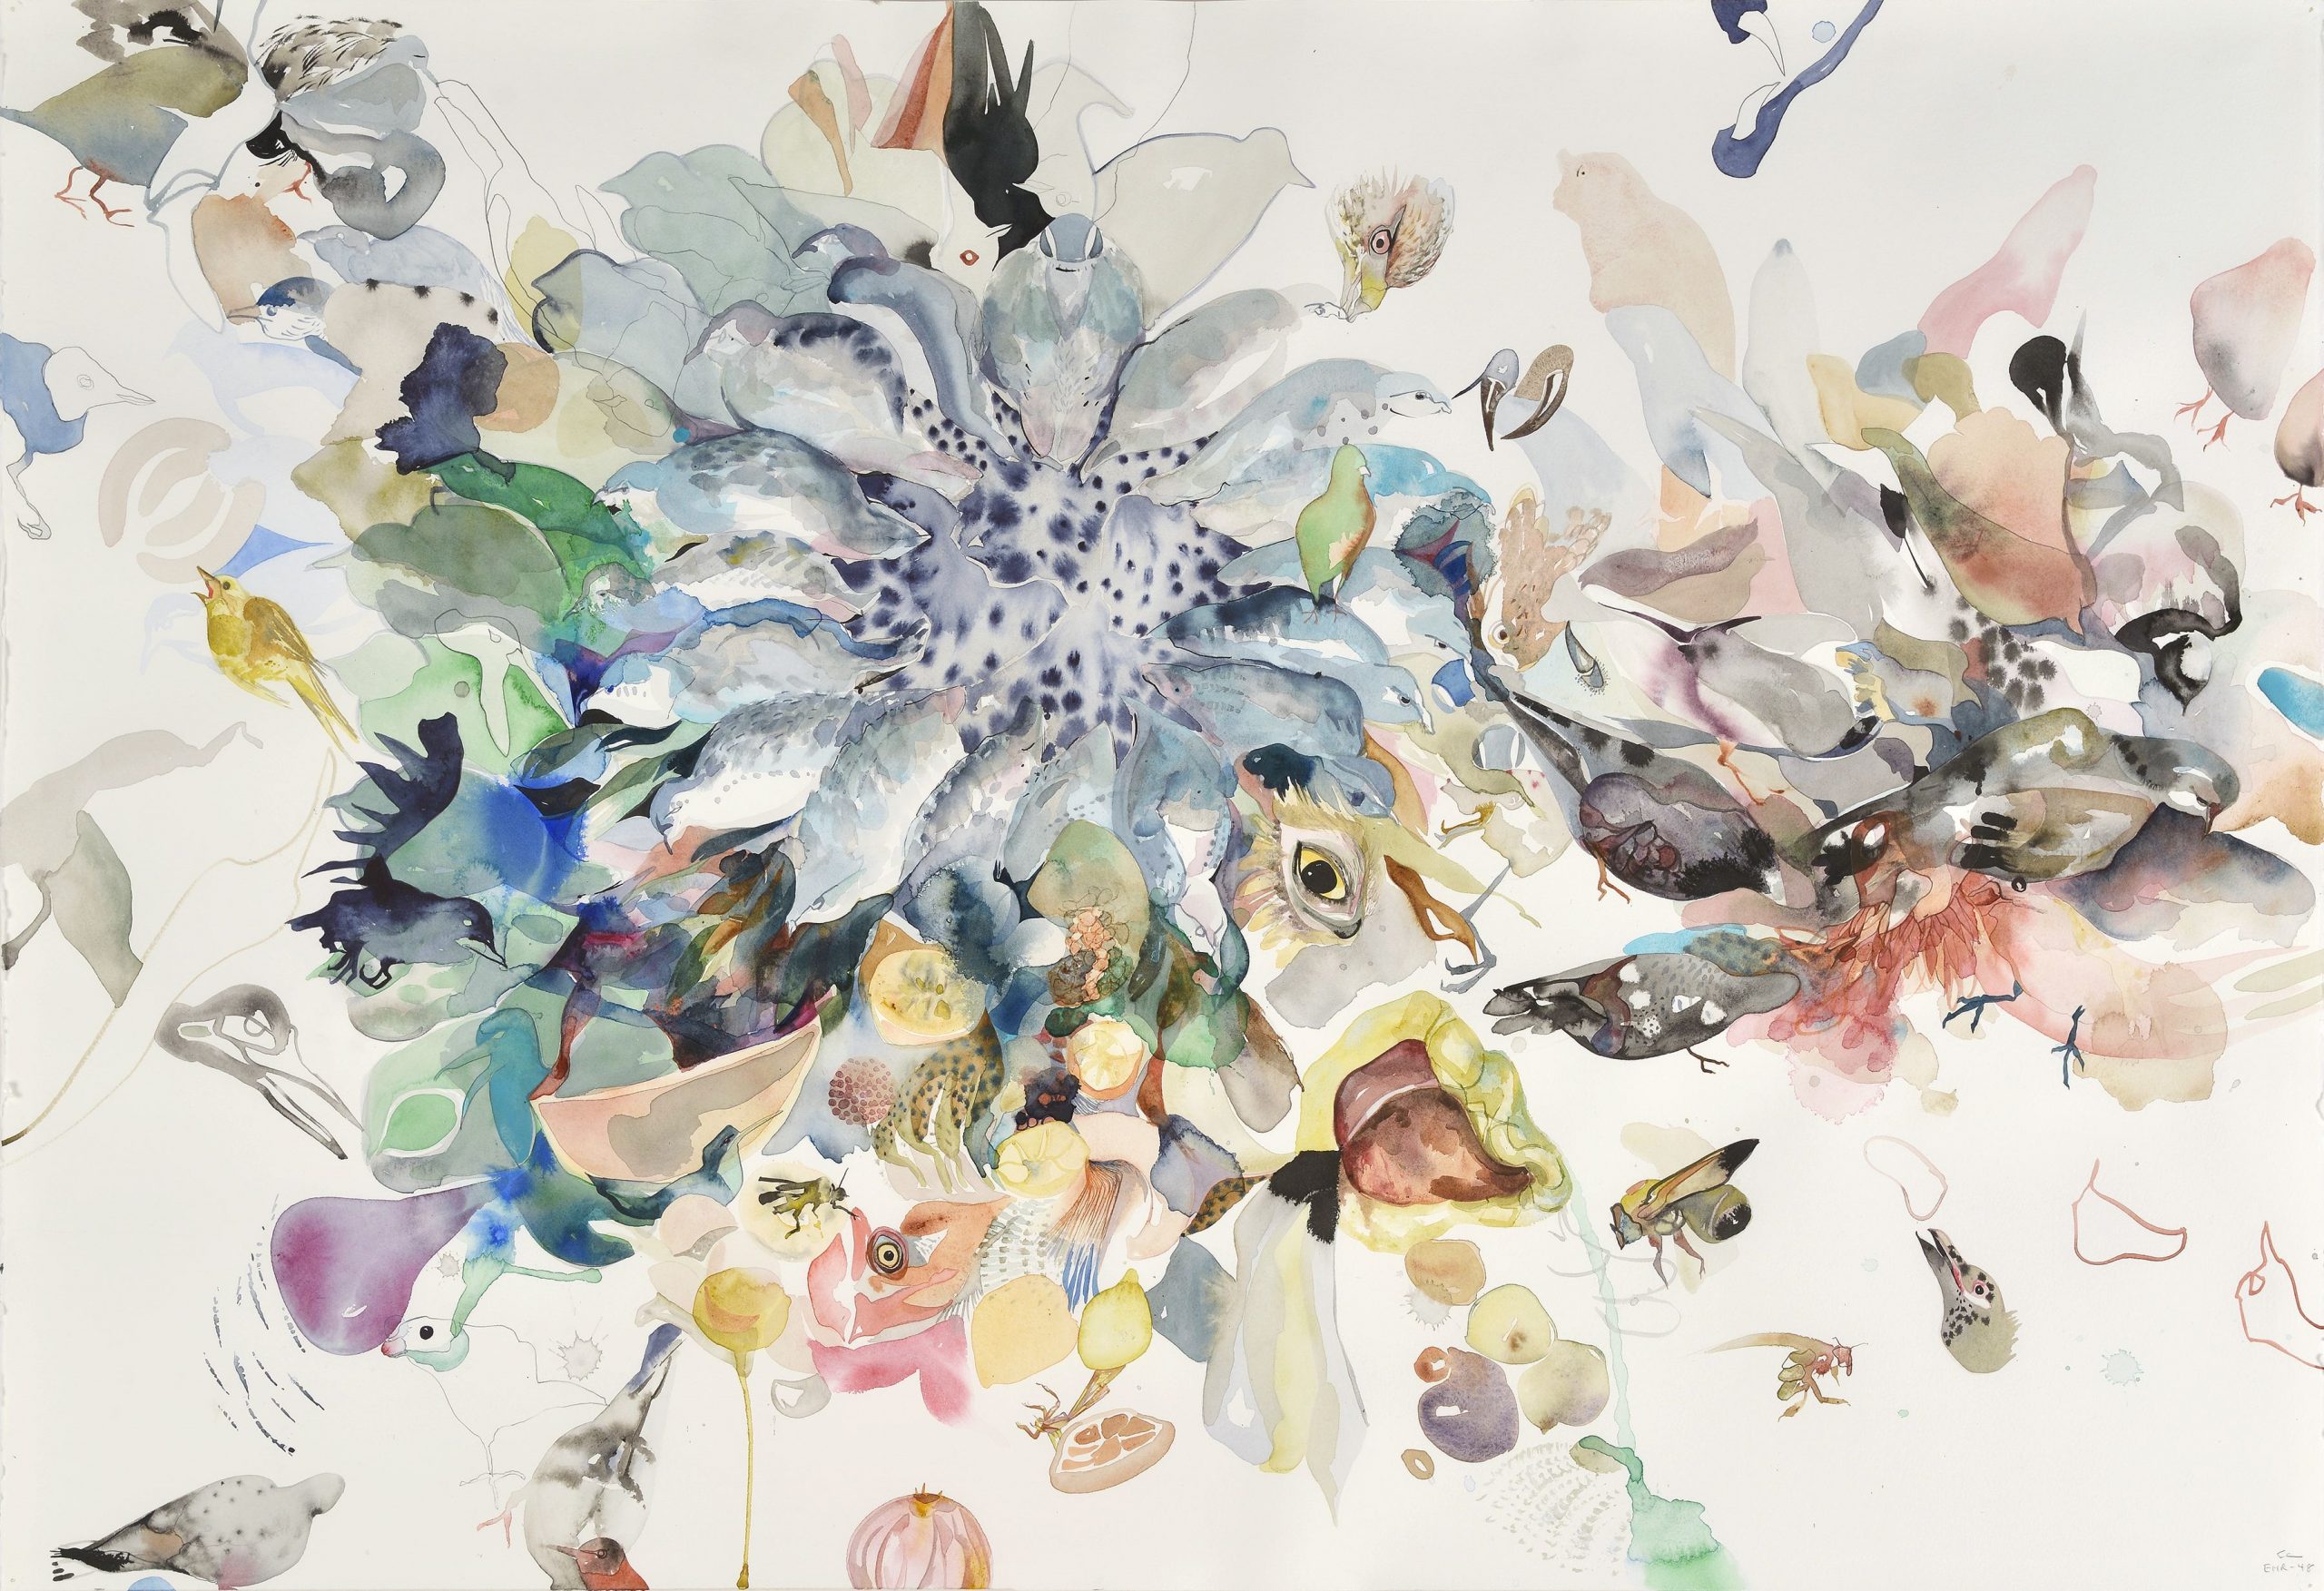 Untitled watercolor by Emilie Clark. Colorful strokes form birds, bees, eyes, flowers, and much more.